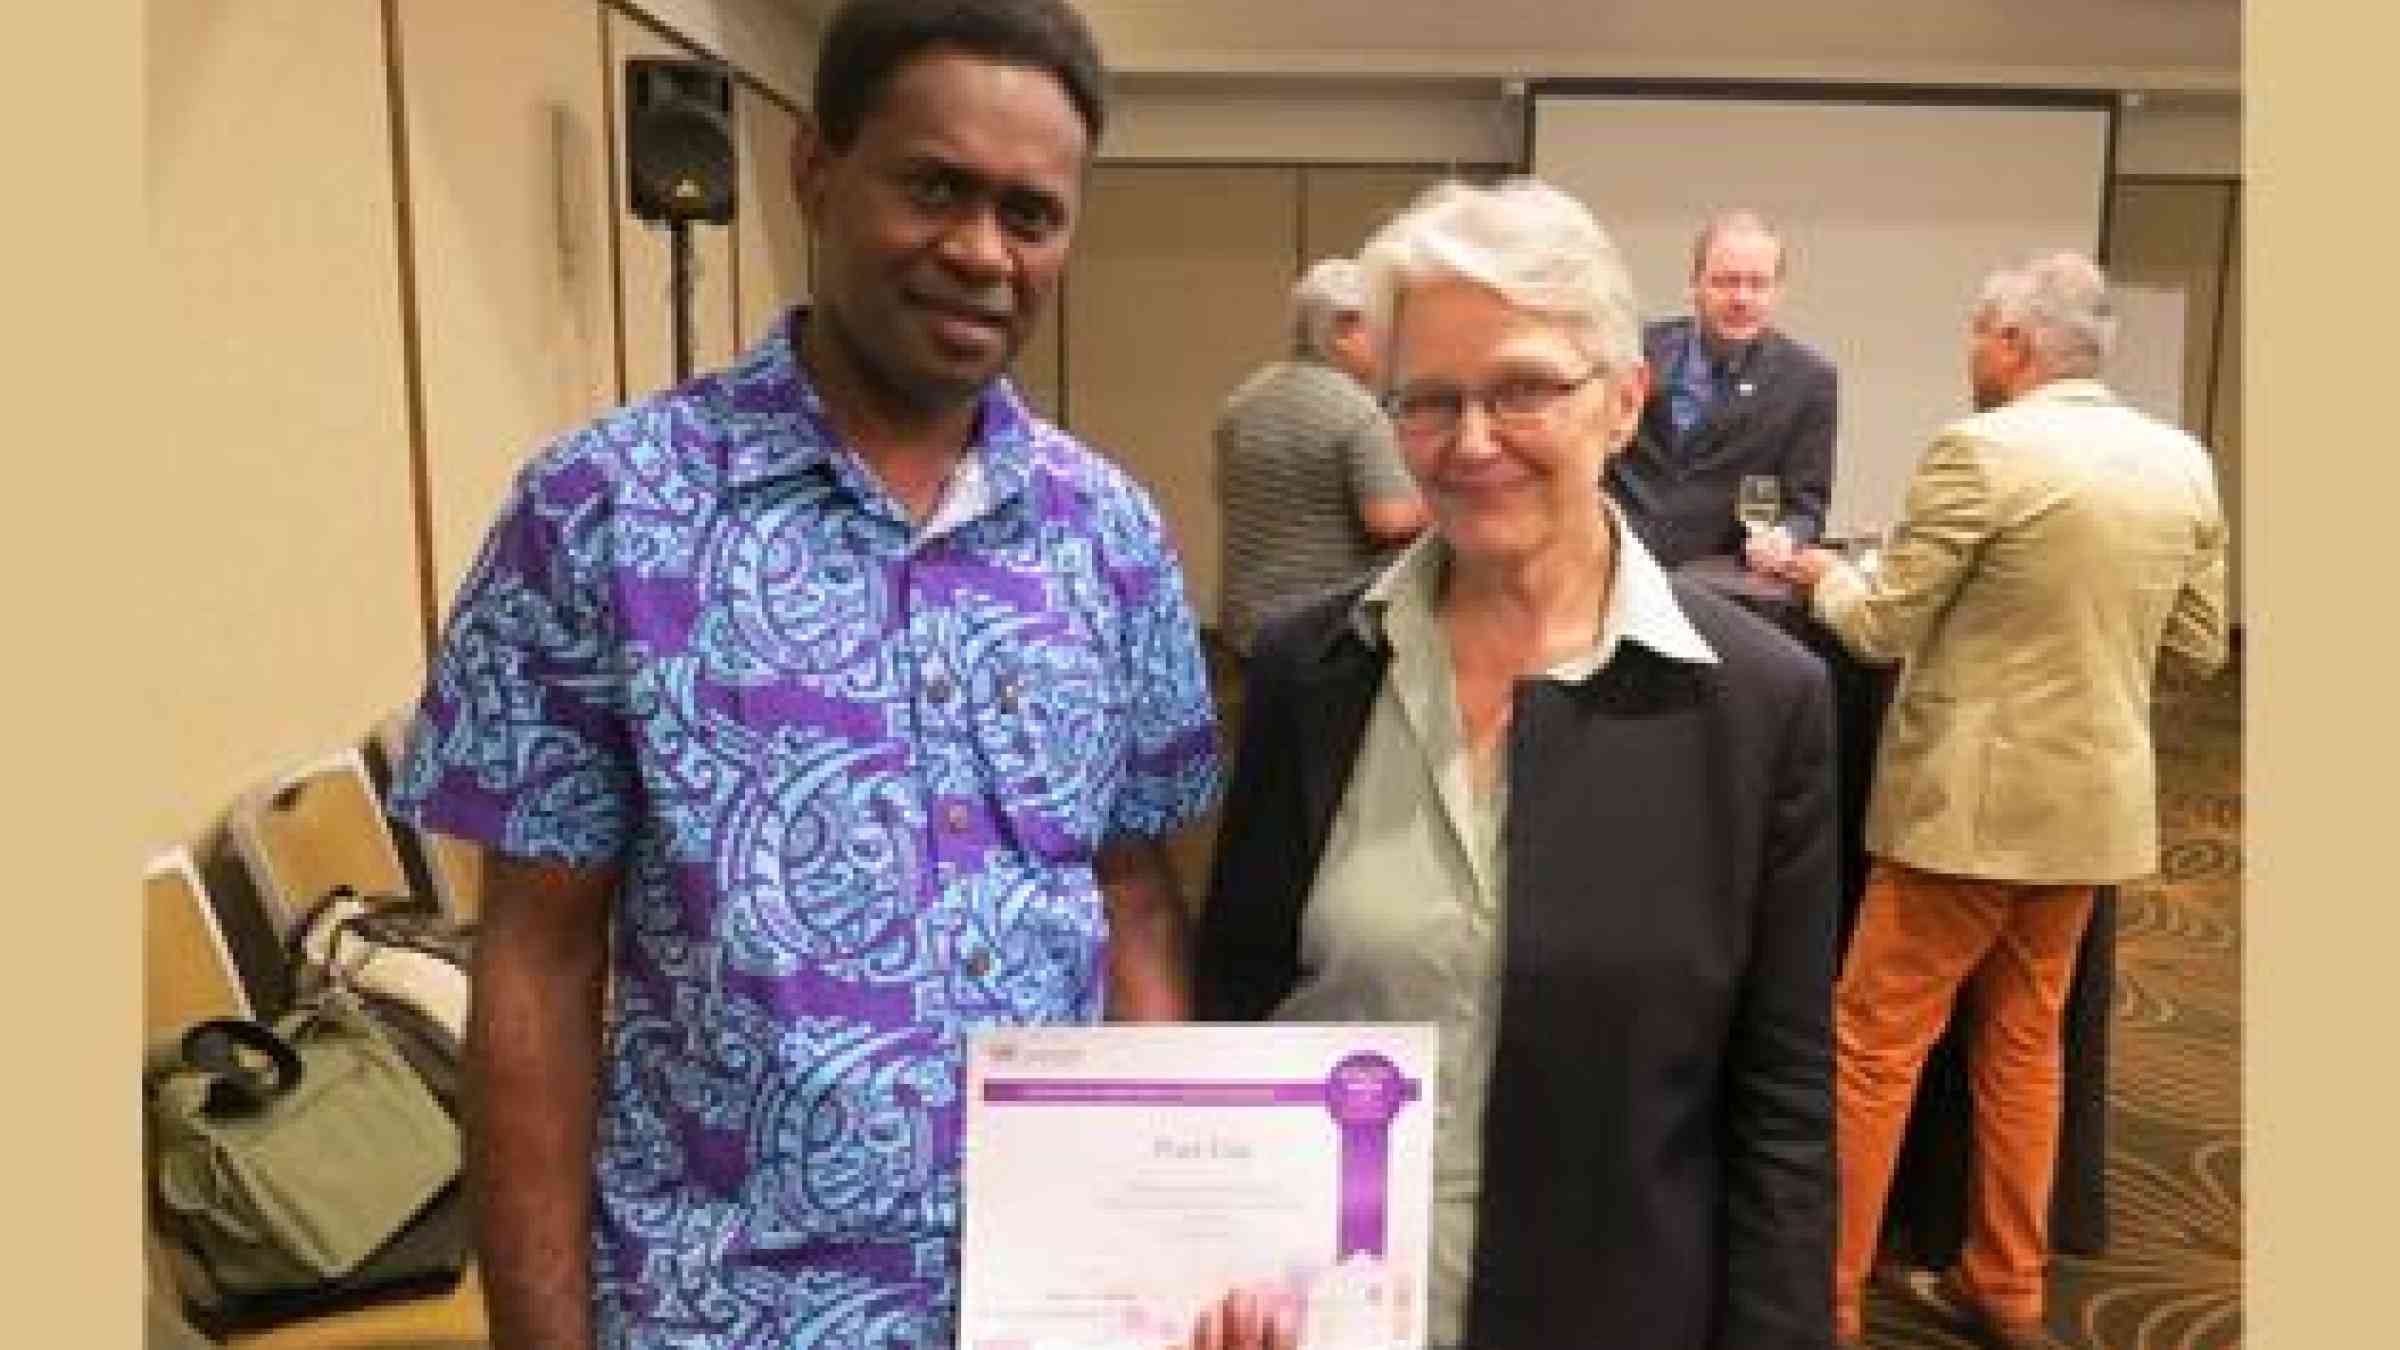 The Lord Mayor of Port Vila Mr Ulrich Sumptoh receives a Certificate of Commitment from the UNISDR's Making Cities Resilient campaign presented by  SRSG Ms Margareta Wahlström. (Photo: UNISDR)